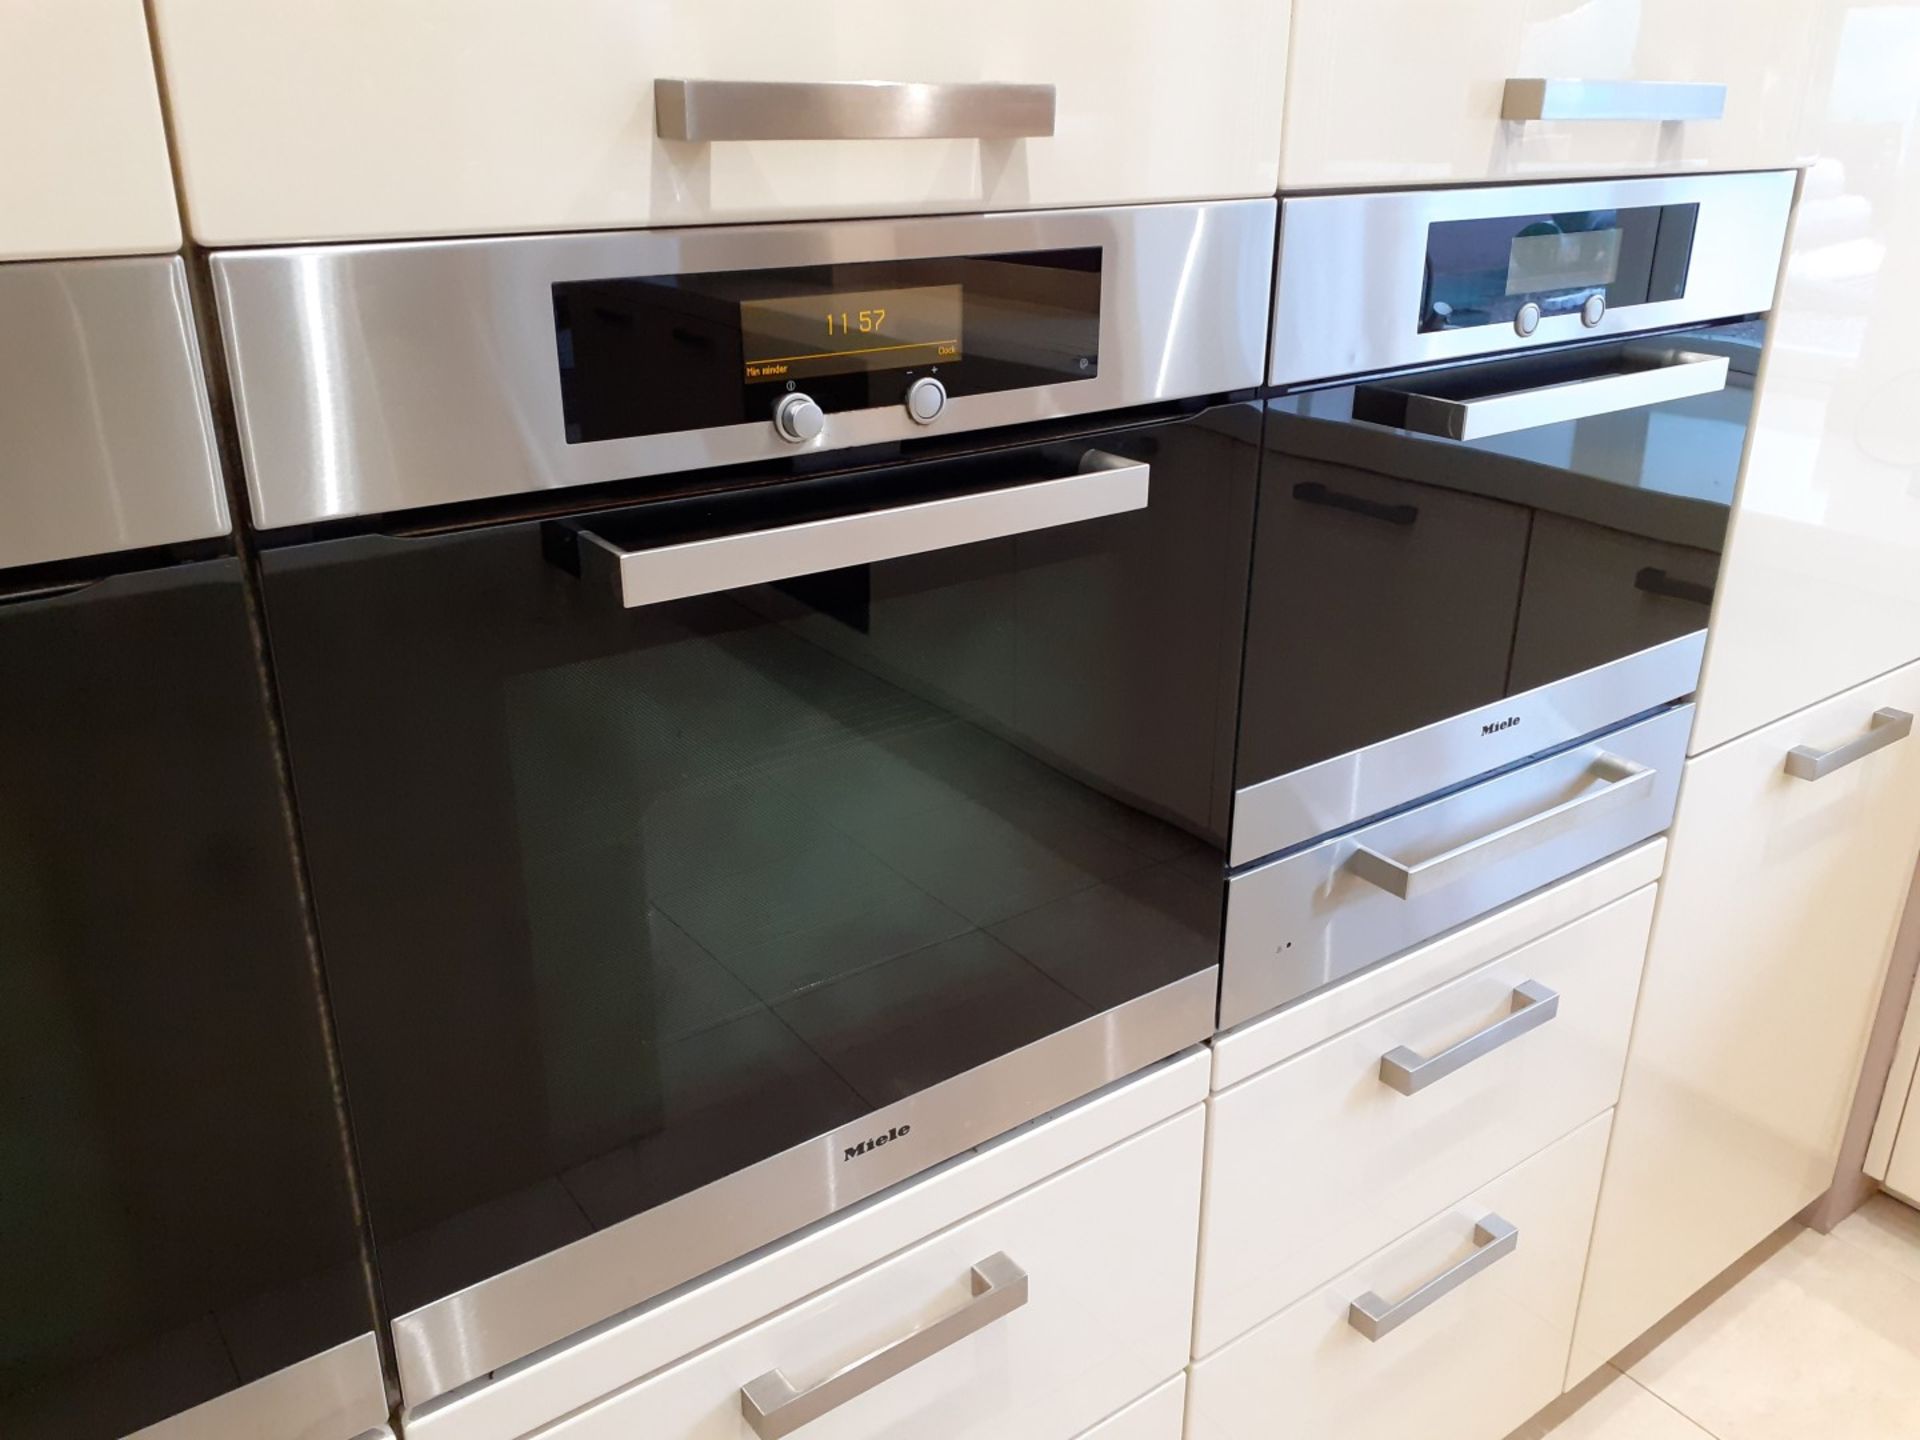 1 x ALNO Fitted Kitchen With Integrated Miele Appliances, Silestone Worktops & Breakfast Island - Image 24 of 77